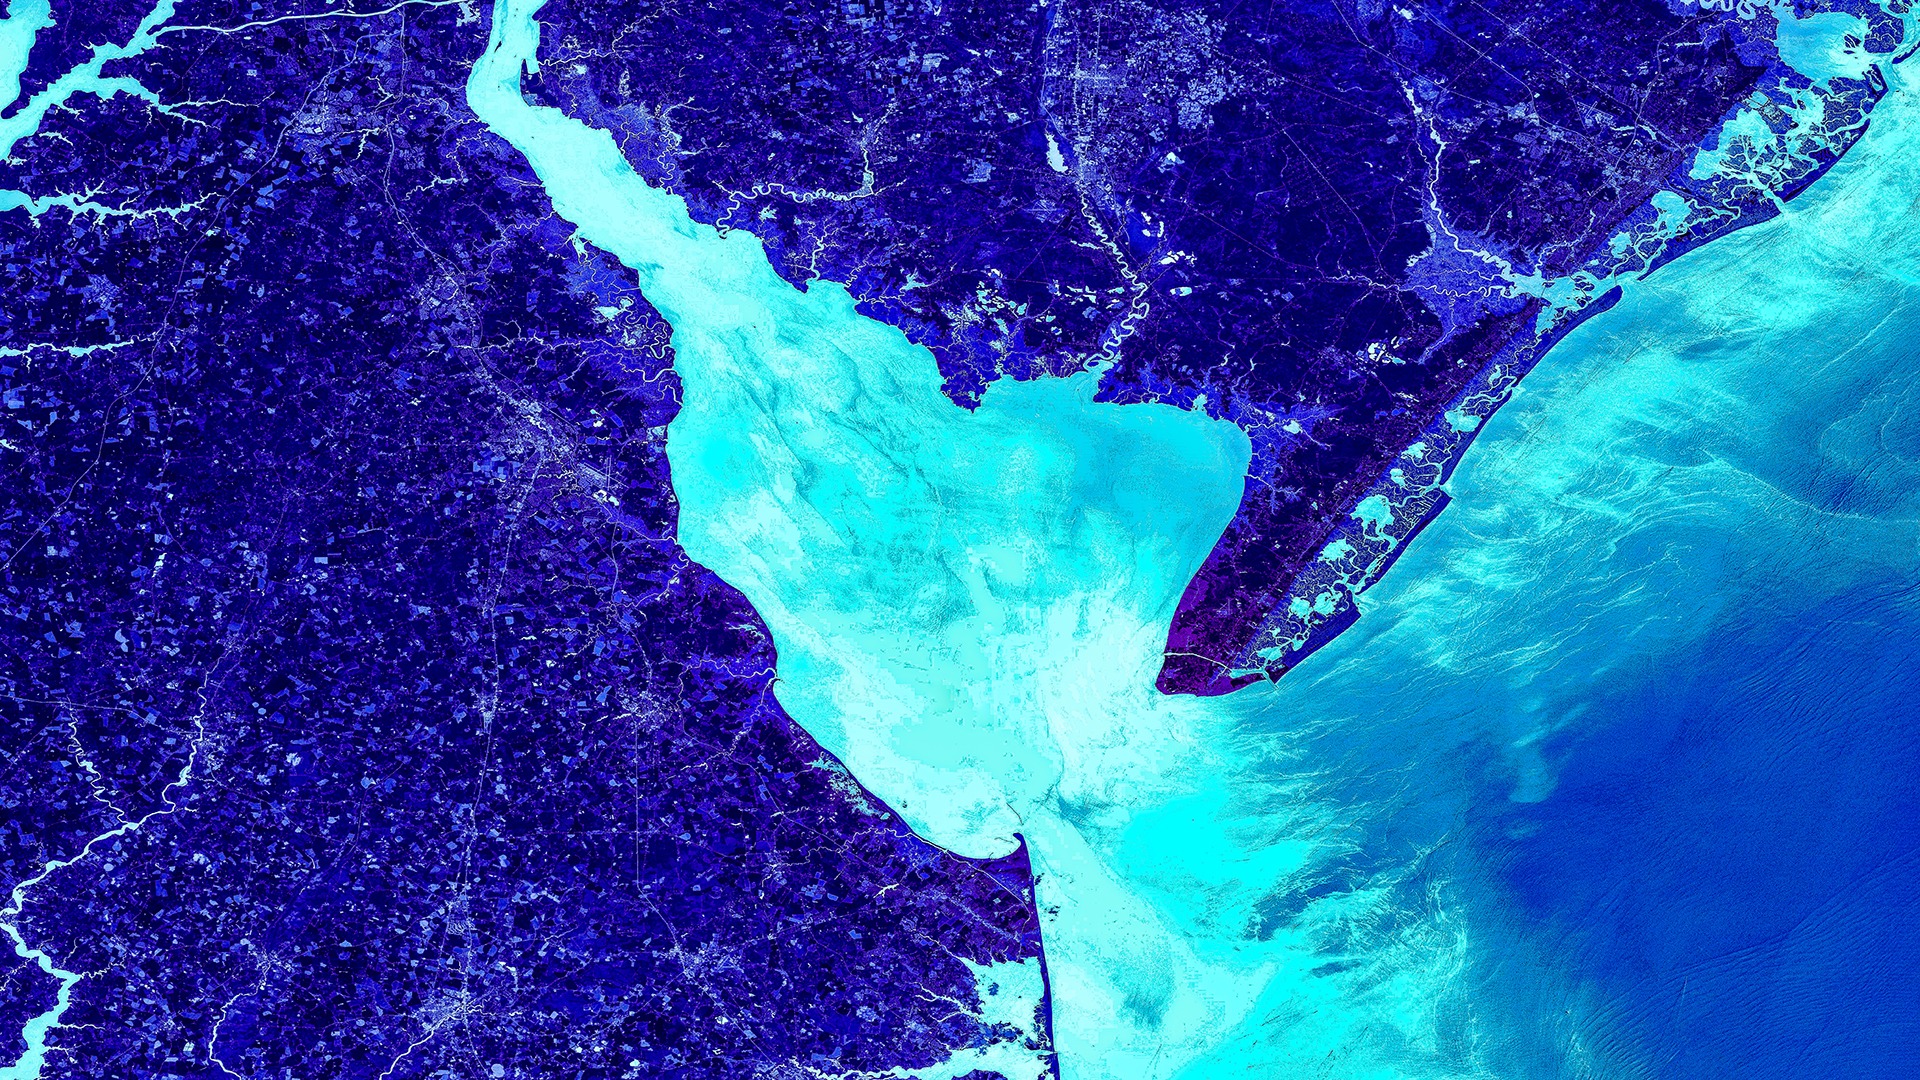 This NDWI-processed image from Landsat 8 OLI imagery (2019) covers the state of Delaware, including the Delaware Bay and Atlantic coastline. Typically with a color ramp like this, light blue would highlight liquid areas and dark blue would indicate land. In this case, however, the color noise as been reduced for aesthetic purposes, and these colors no longer distinguish between land and water.  Keywords: NDWI, Delaware, Coastline